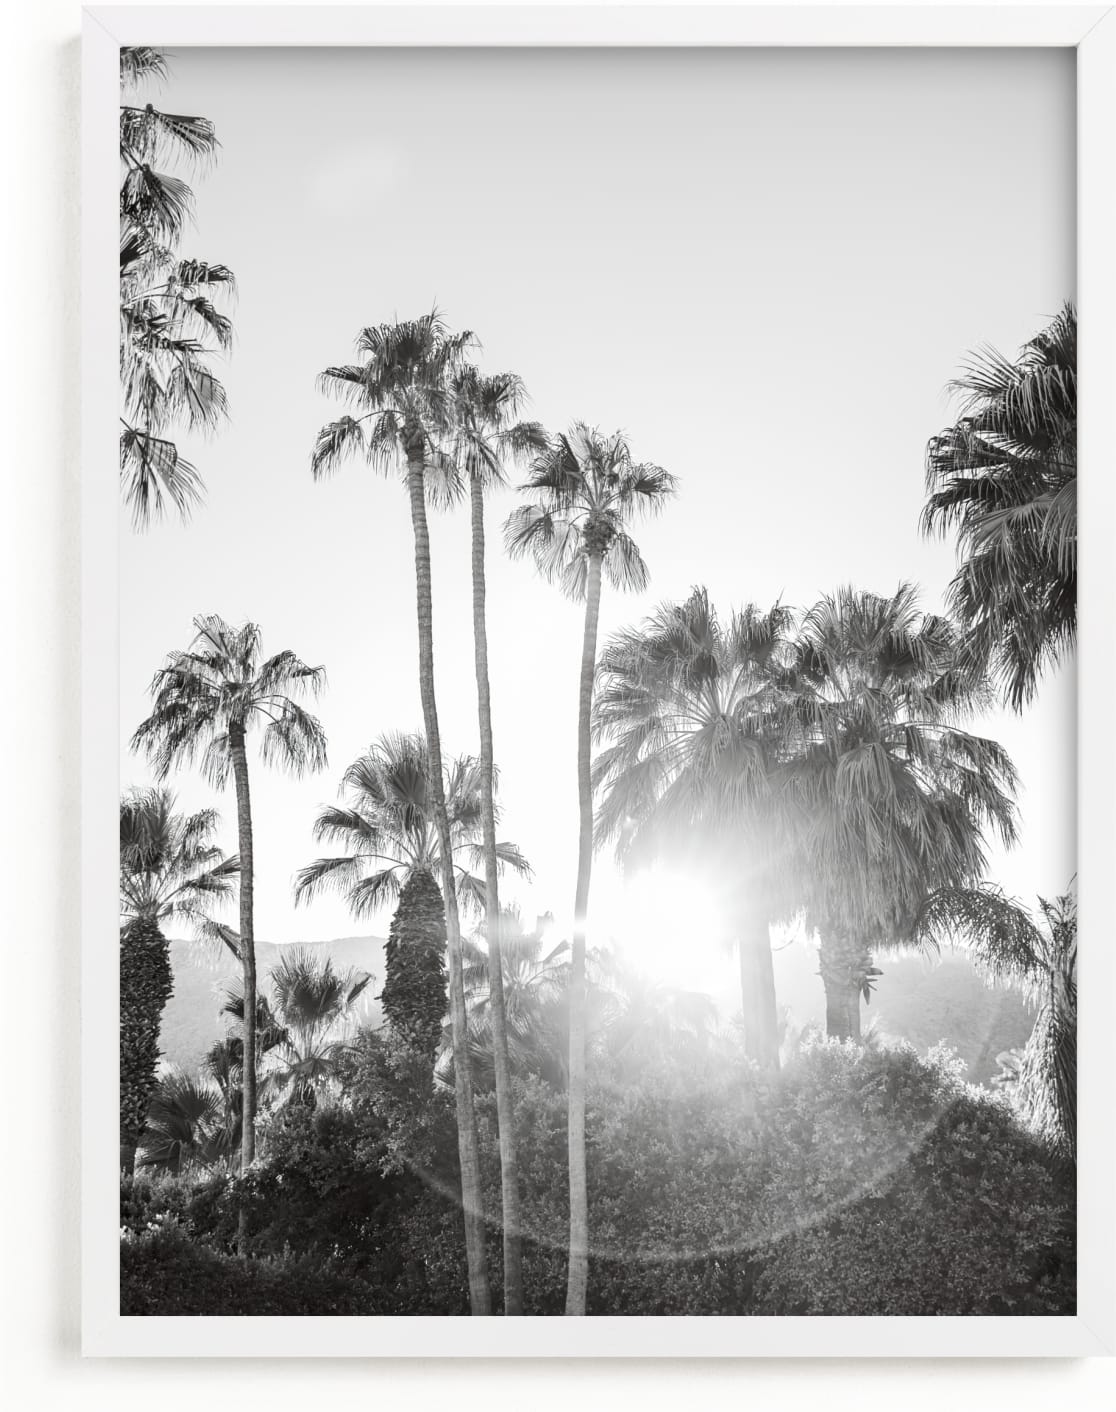 This is a black and white art by Jamie Lollback called Sunflare Palms.